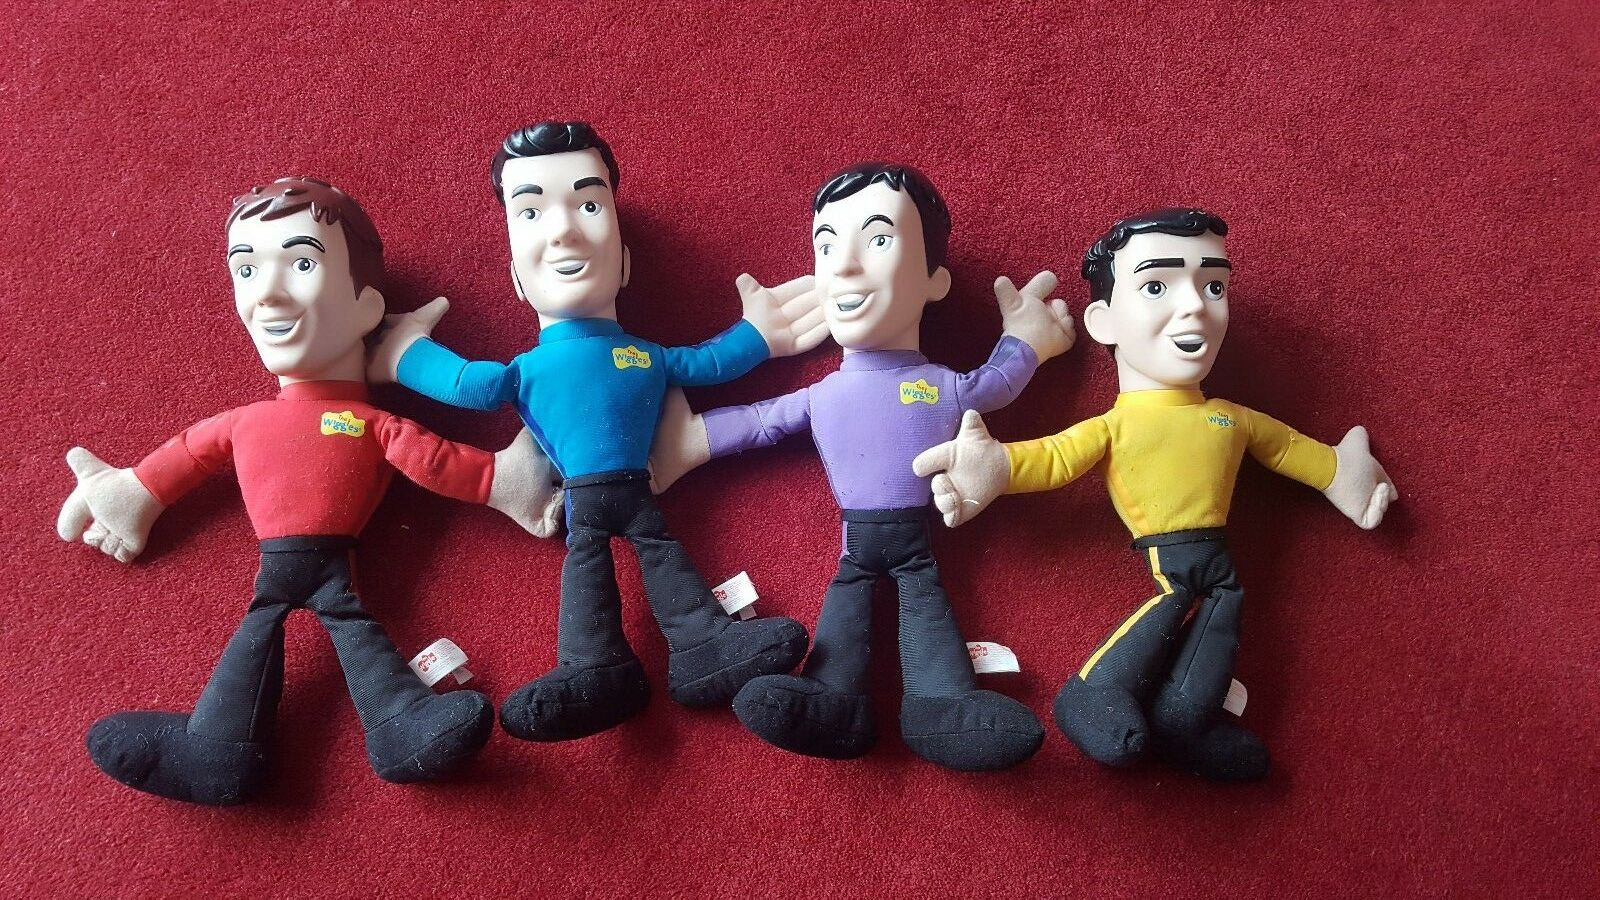 wiggles anthony doll